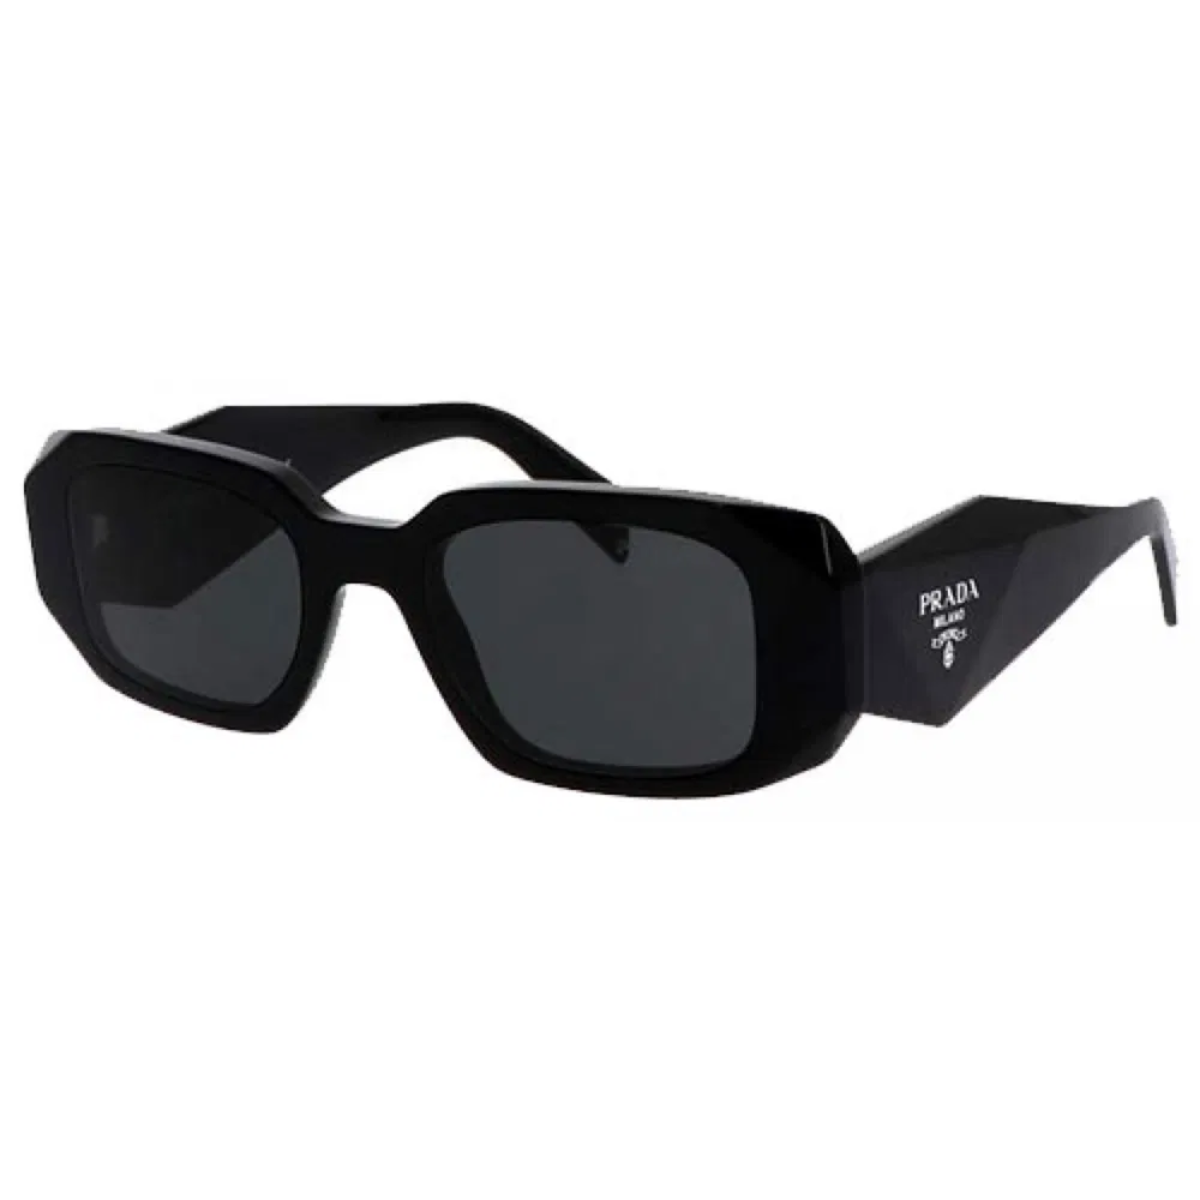  "Elevate your summer style with Prada SPR 17WS 1AB5S0 sunglasses from Optorium, offering a sleek rectangular shape and fashionable shiny black frame, suitable for both men and women."